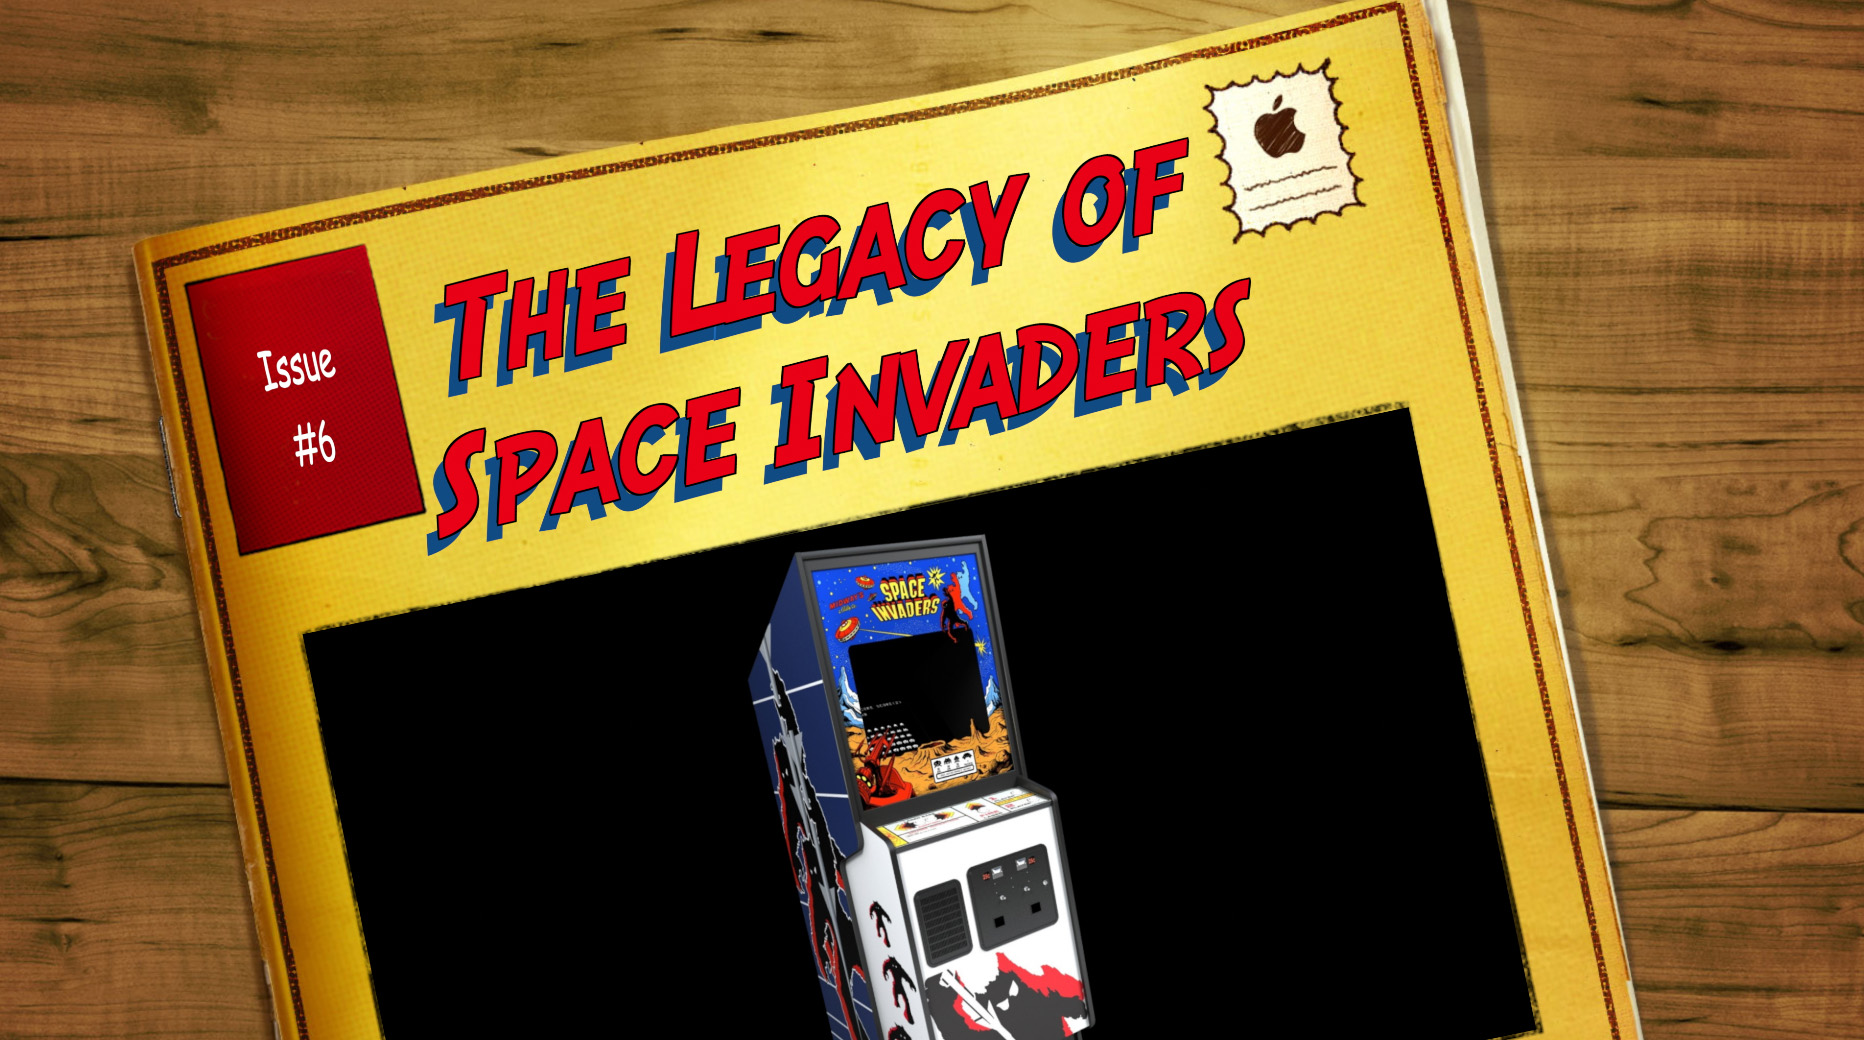 Issue #6 The Legacy of Space Invaders